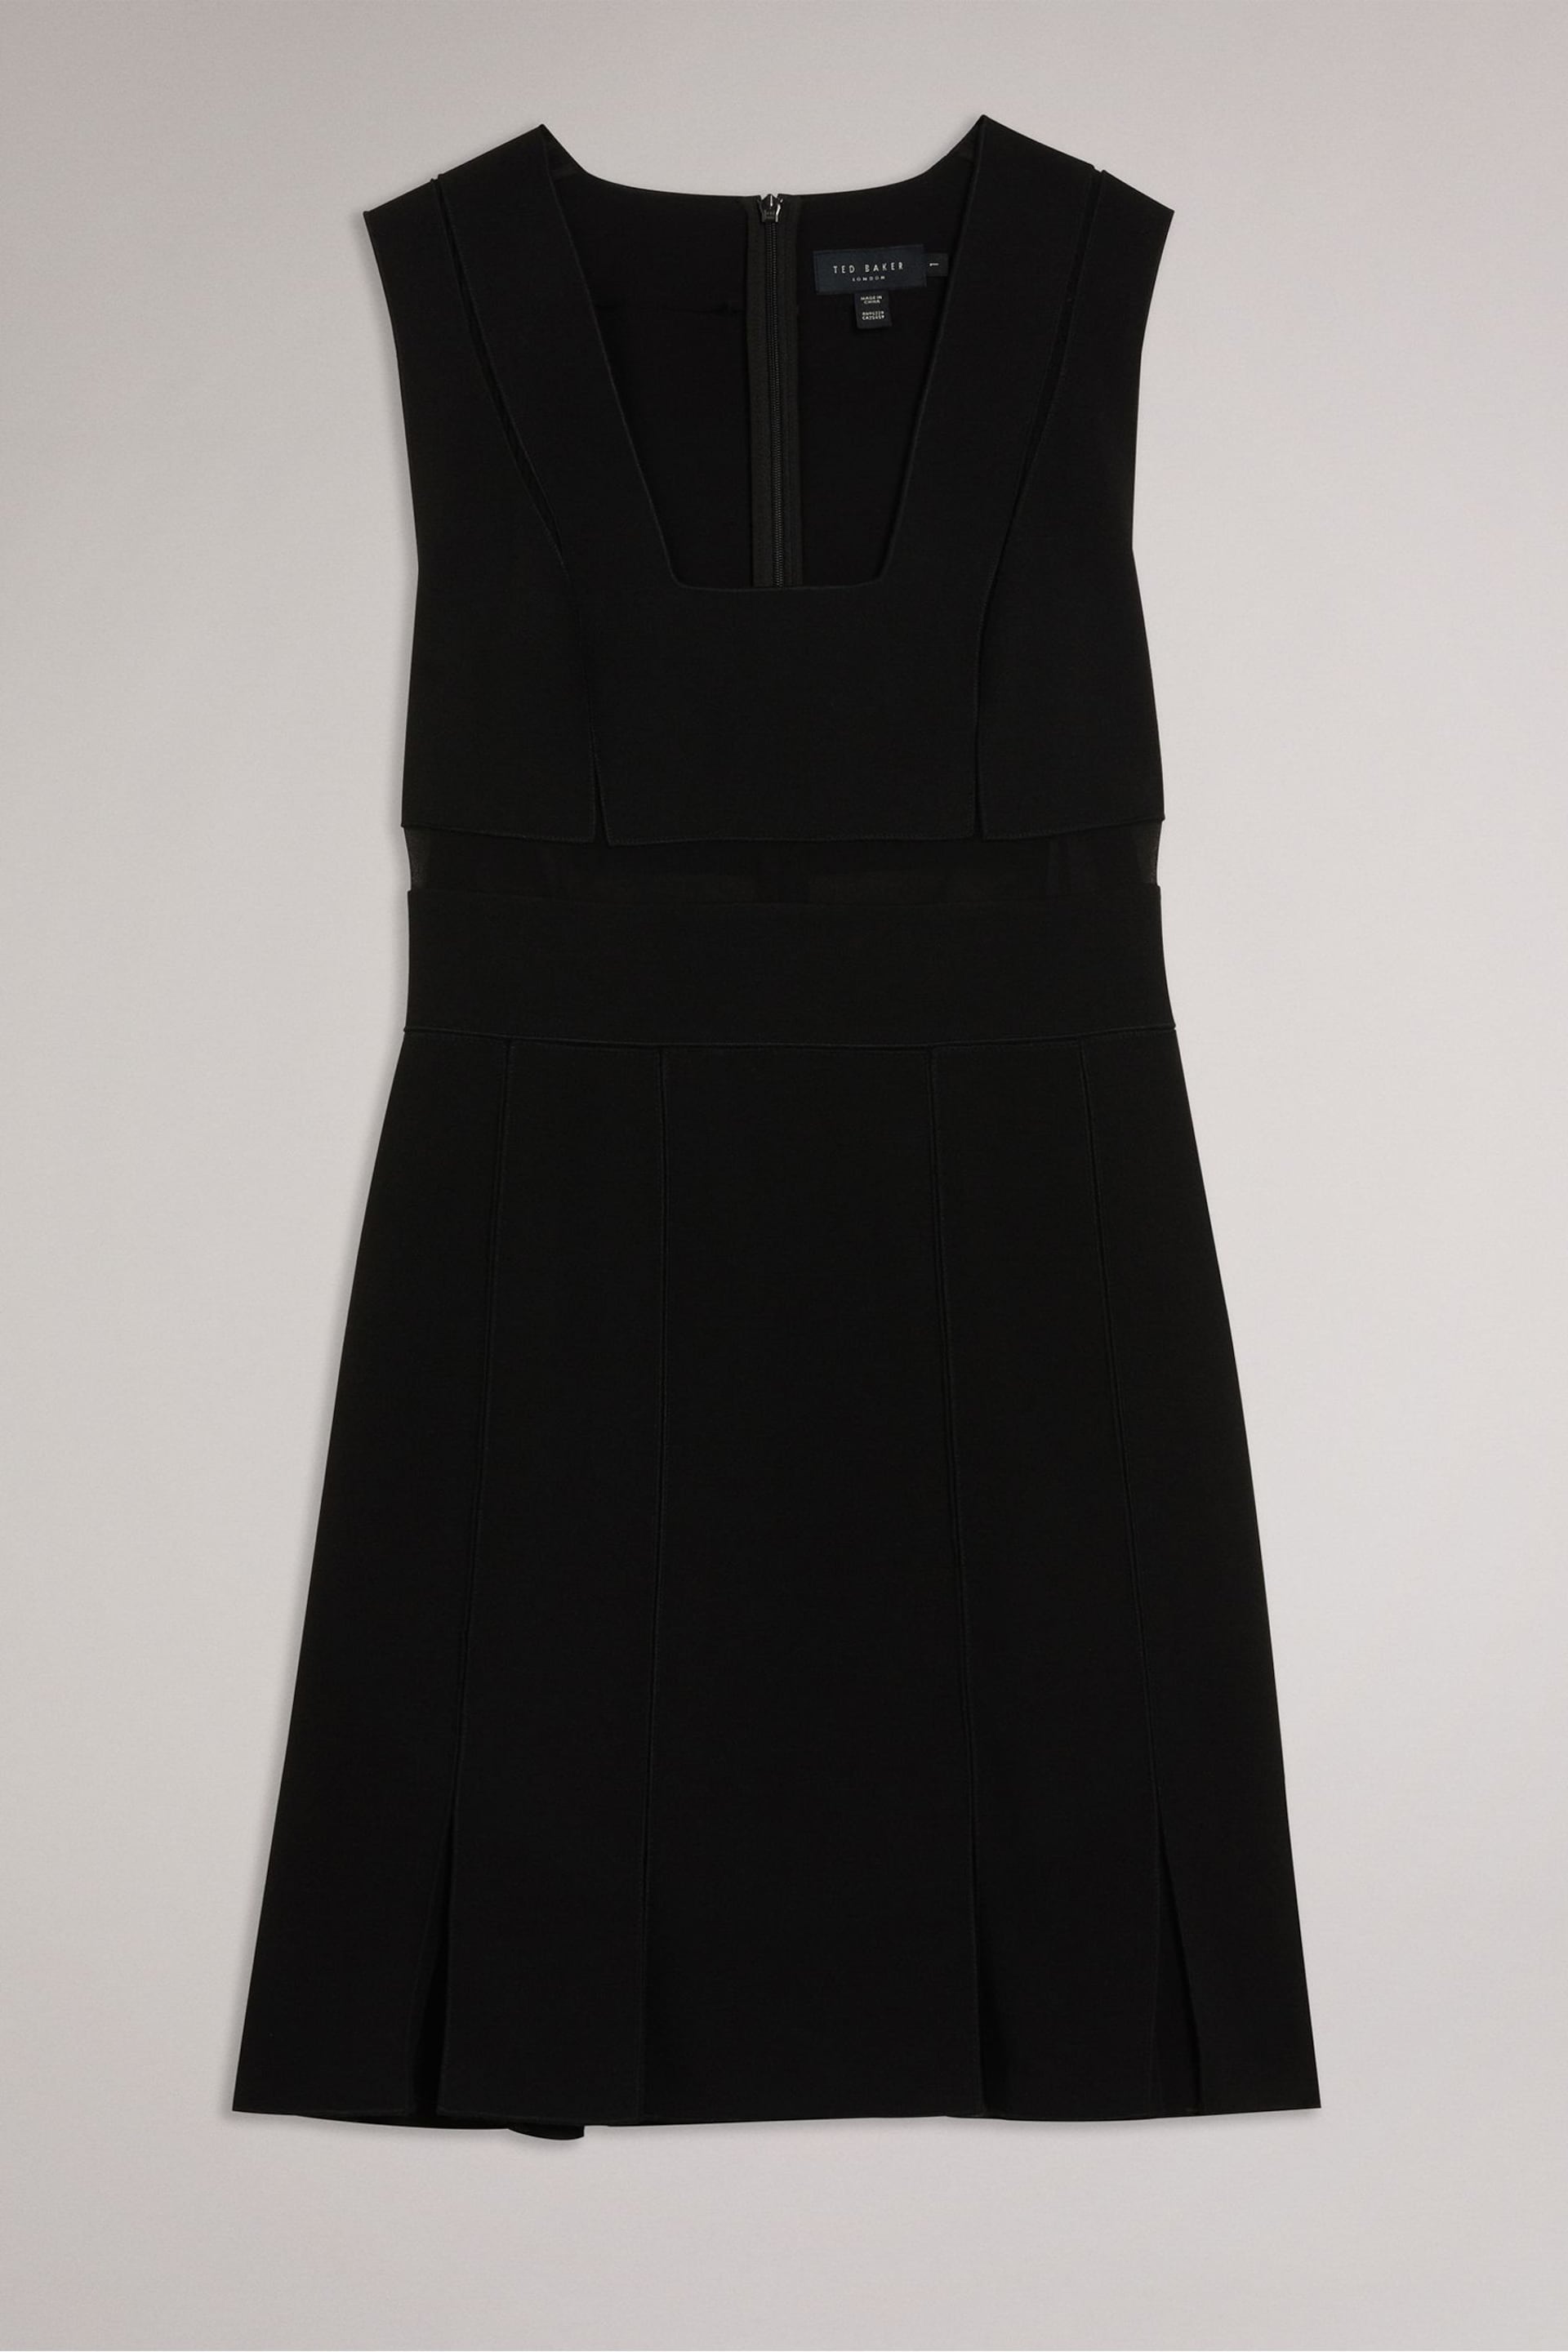 Ted Baker Black Mini Ellinia Shift Dress With Panelling - Image 6 of 6